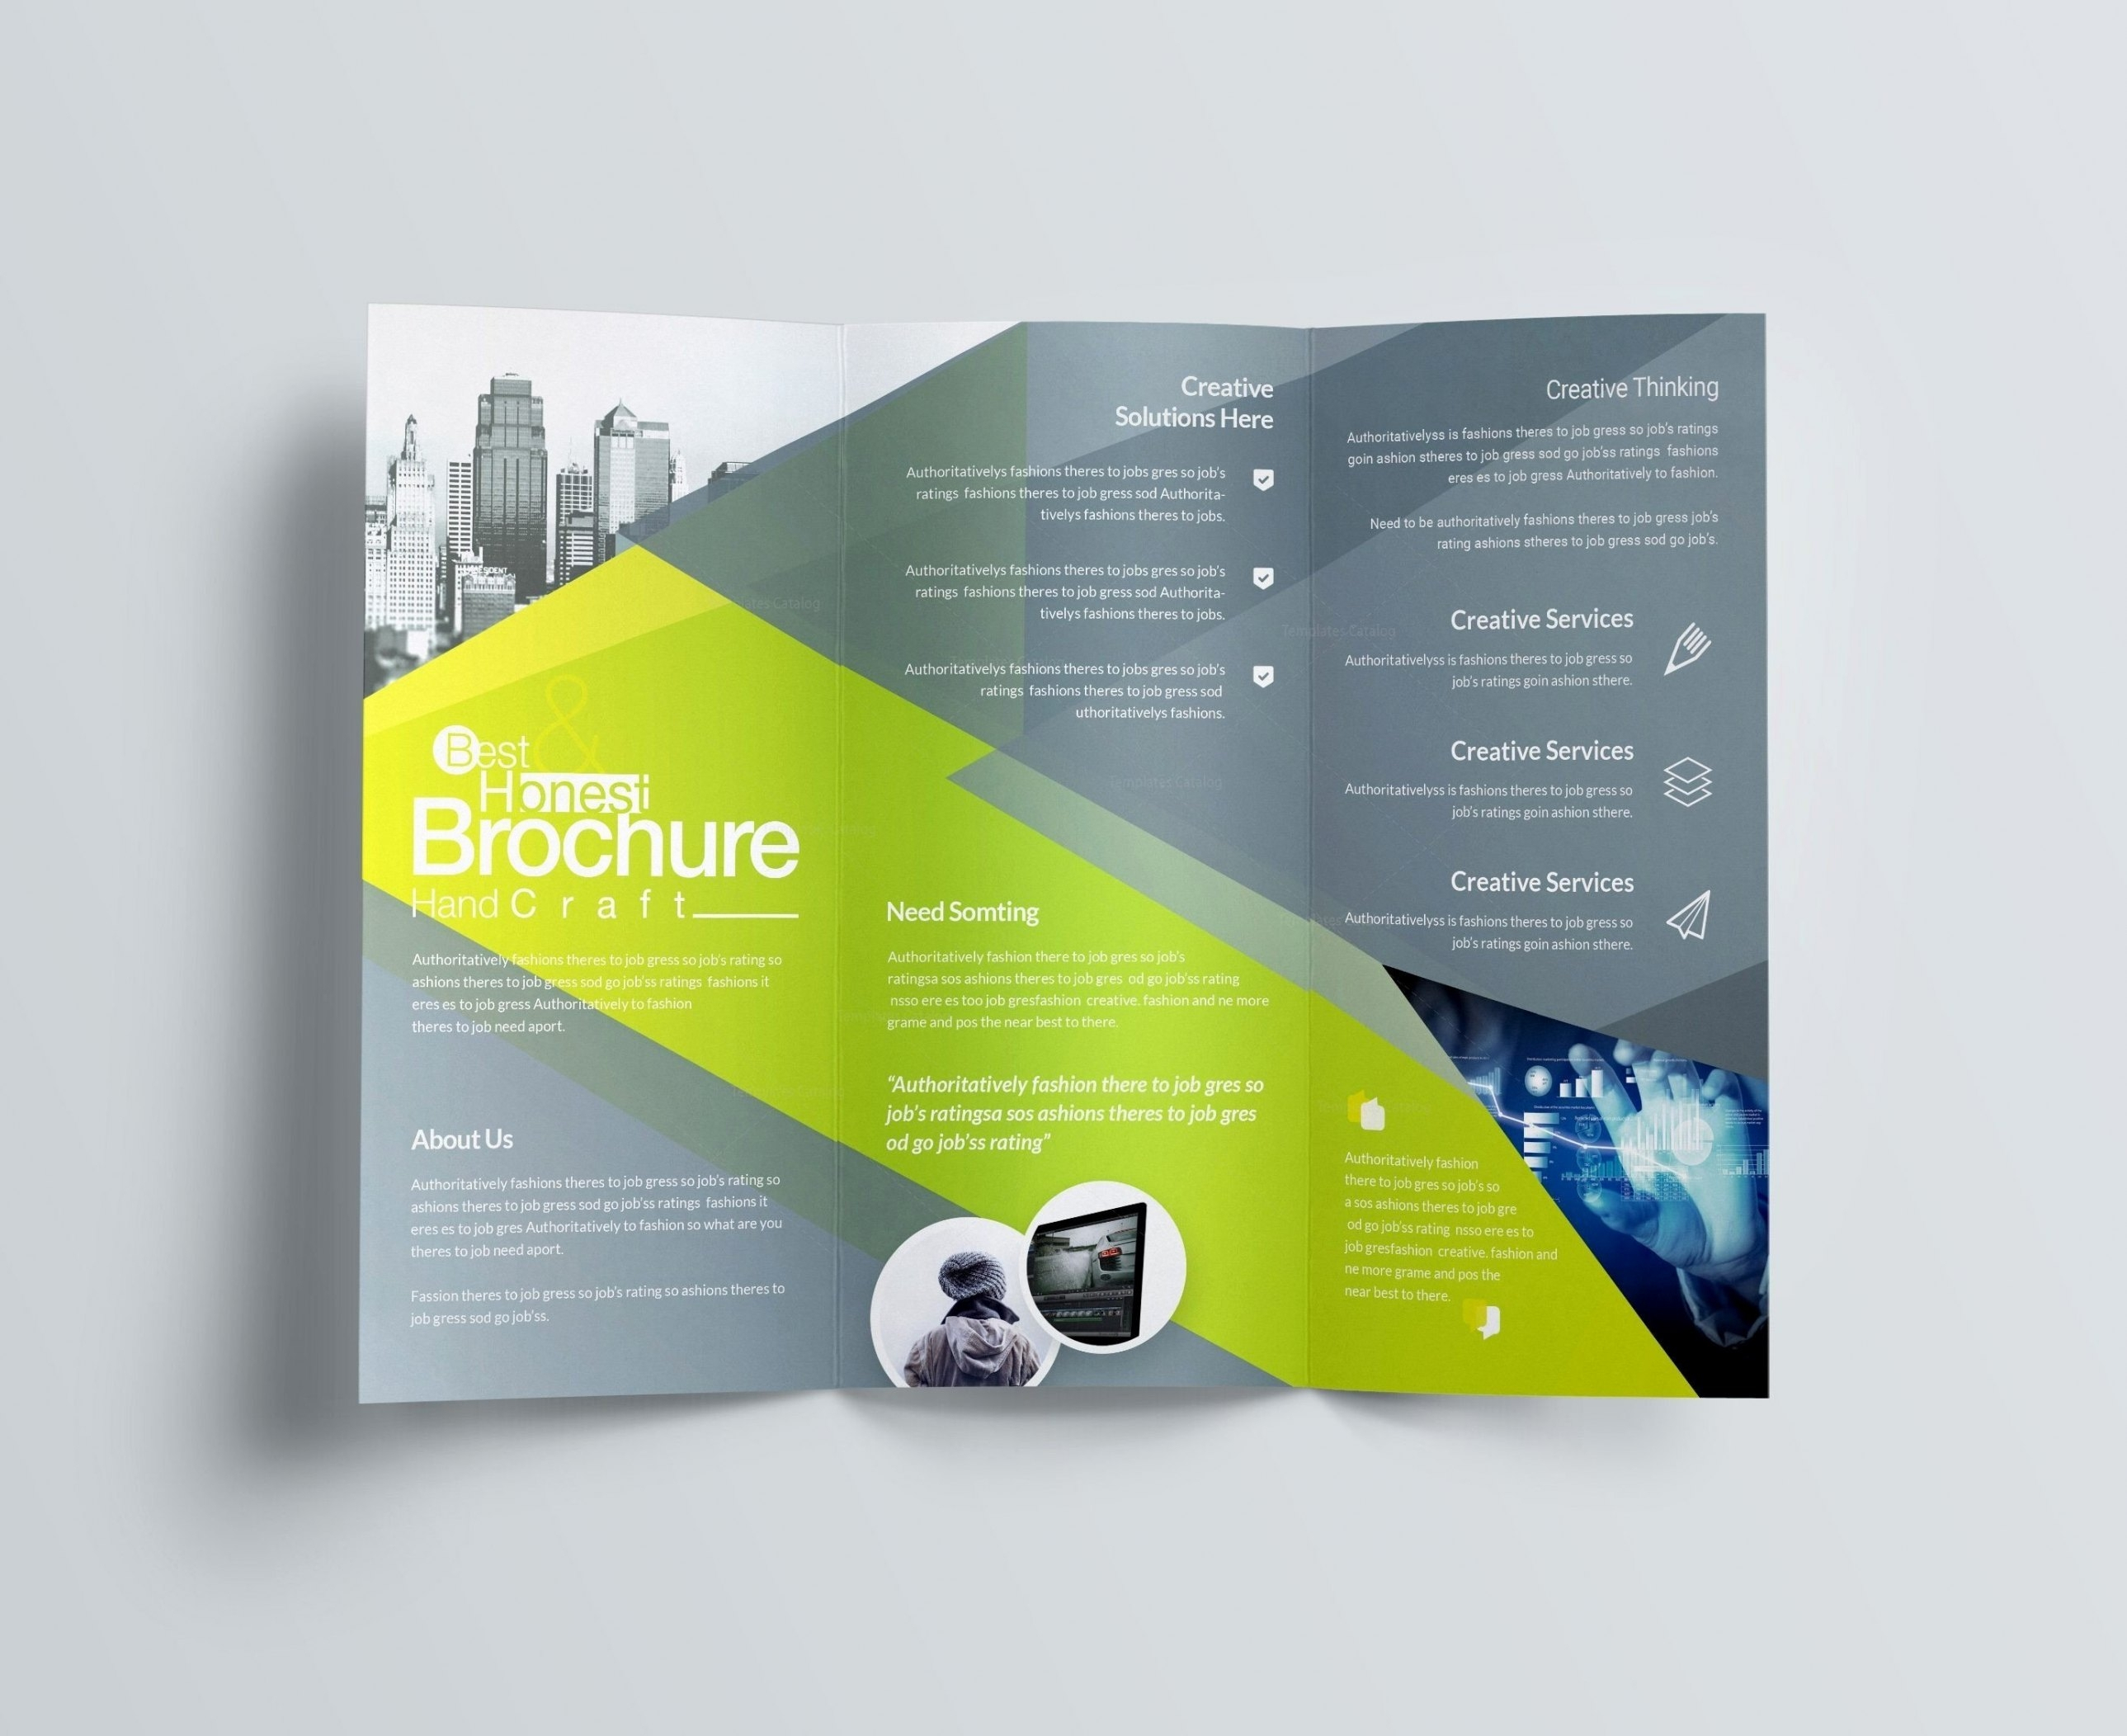 Computer Science Brochure Templates Design Free Download Throughout Creative Brochure Templates Free Download